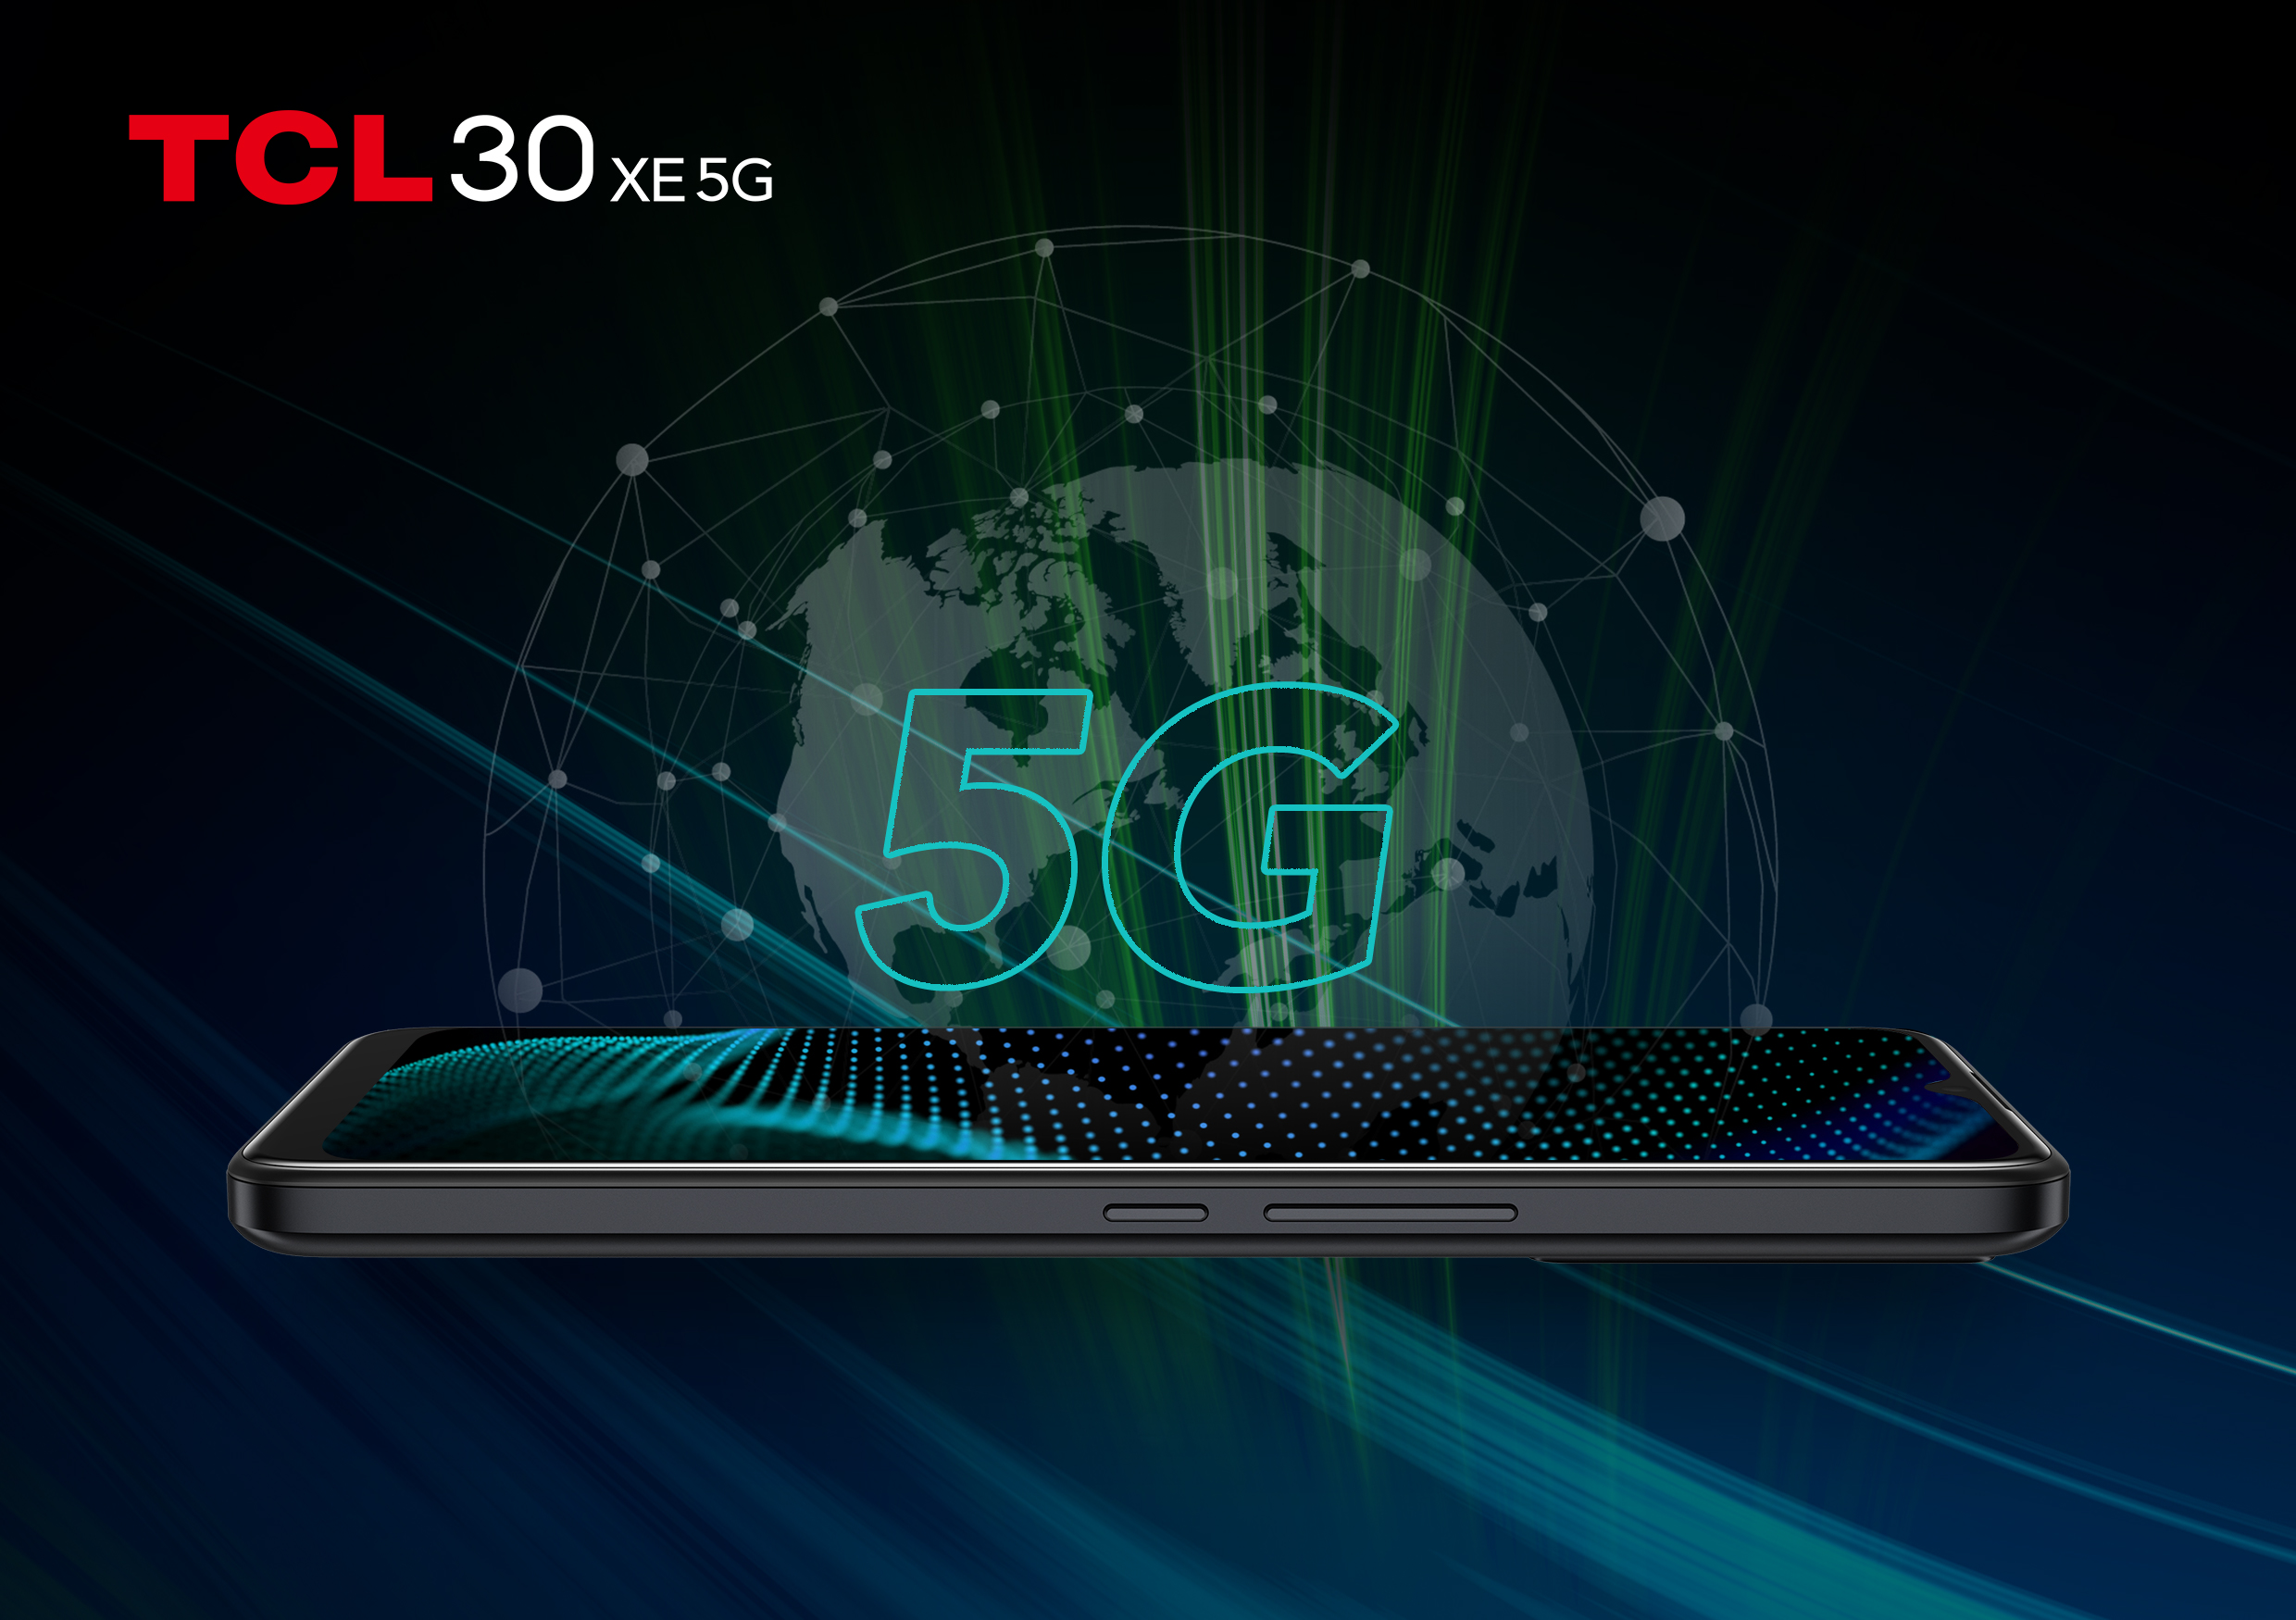 TCL 30 XE 5G 7